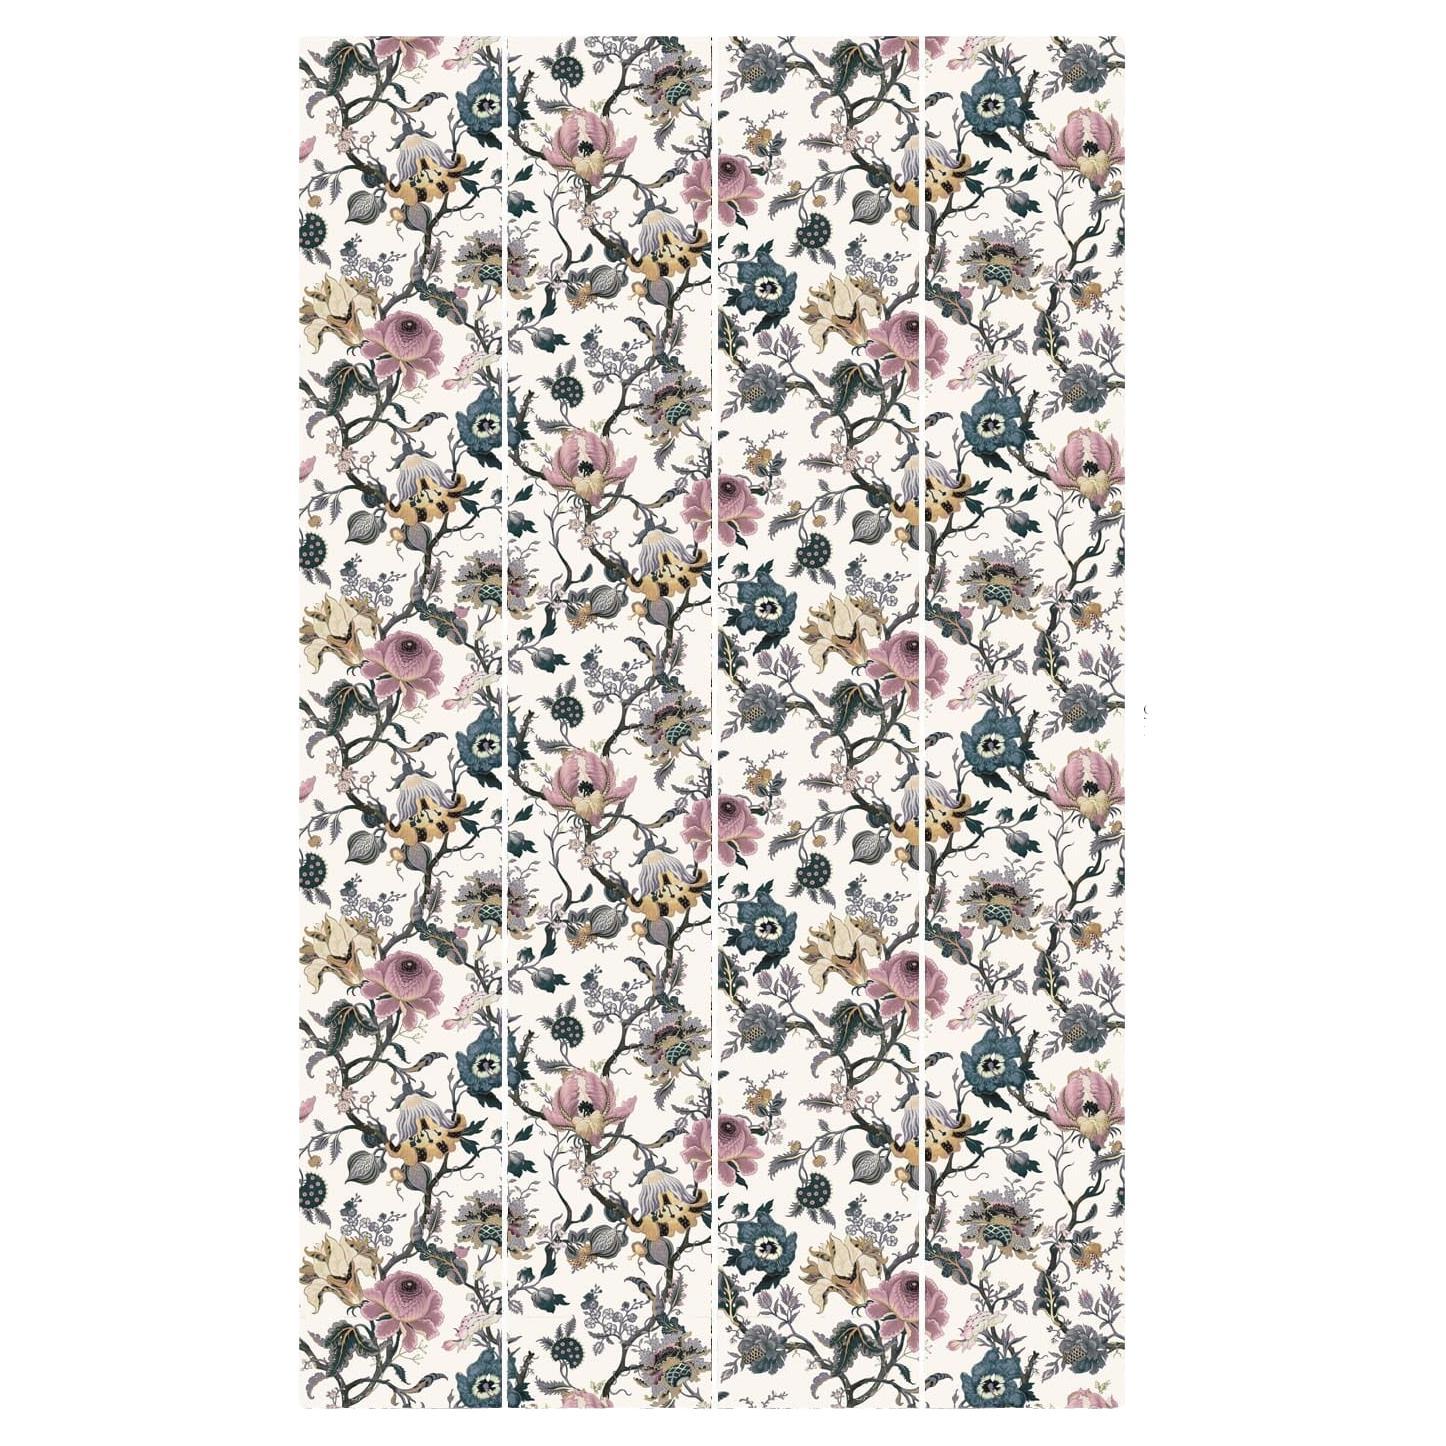 Showcasing serene shades of pink, mauve and teal on a neutral base, the ARTEMIS wallpaper in 'Off-White' is a fresh take on this beloved House of Hackney print. Inspired by the work of William Morris, it's a contemporary way to introduce